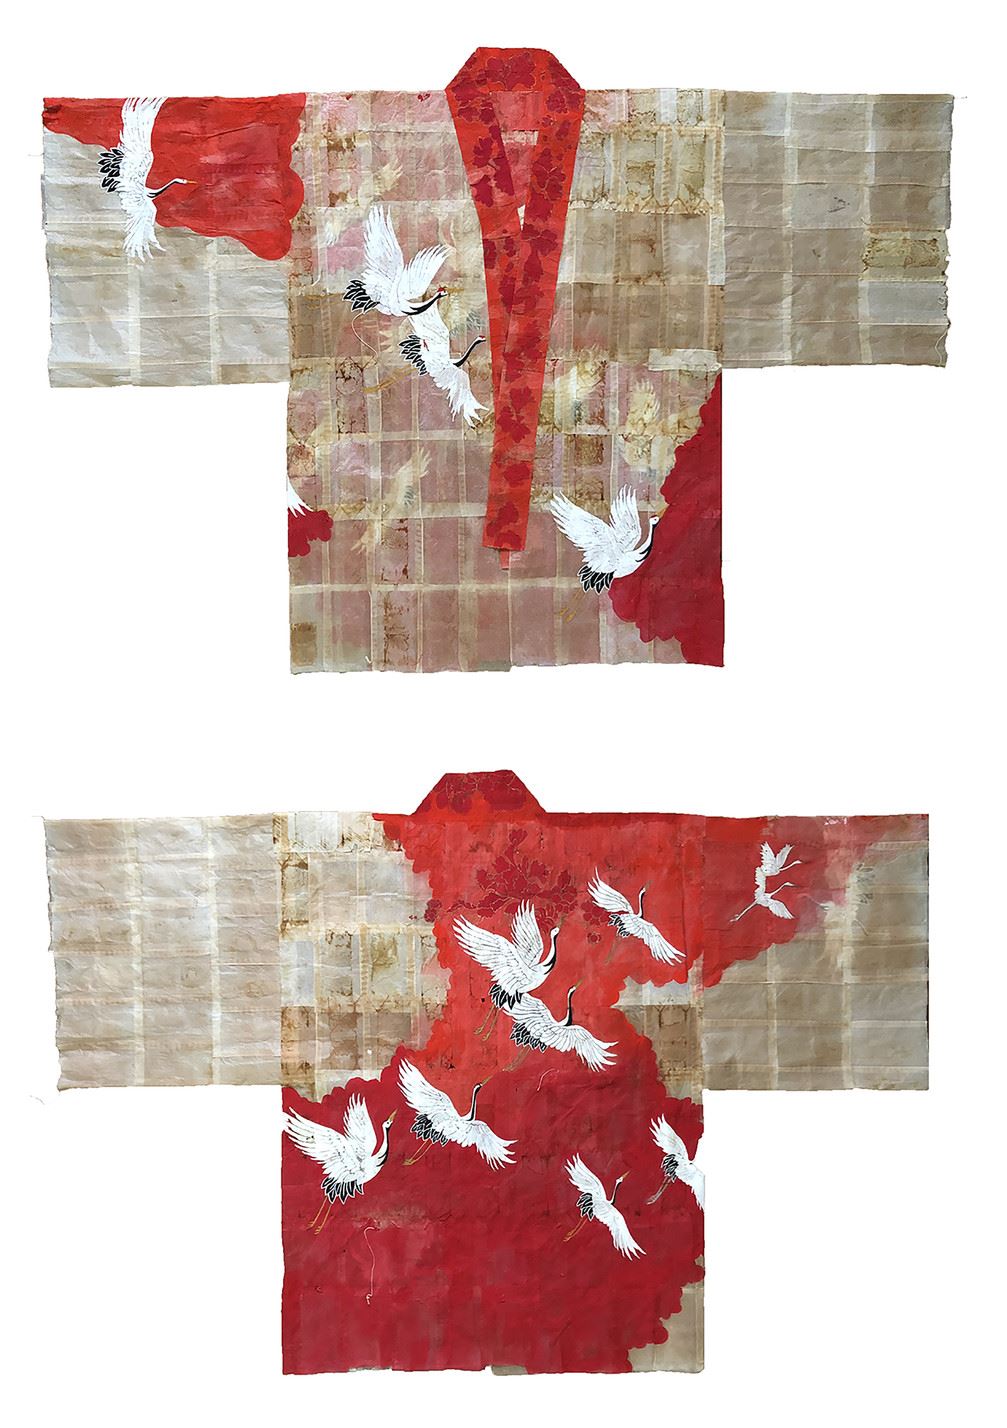 Two images of a kimono made from tea bags, shown front and back.